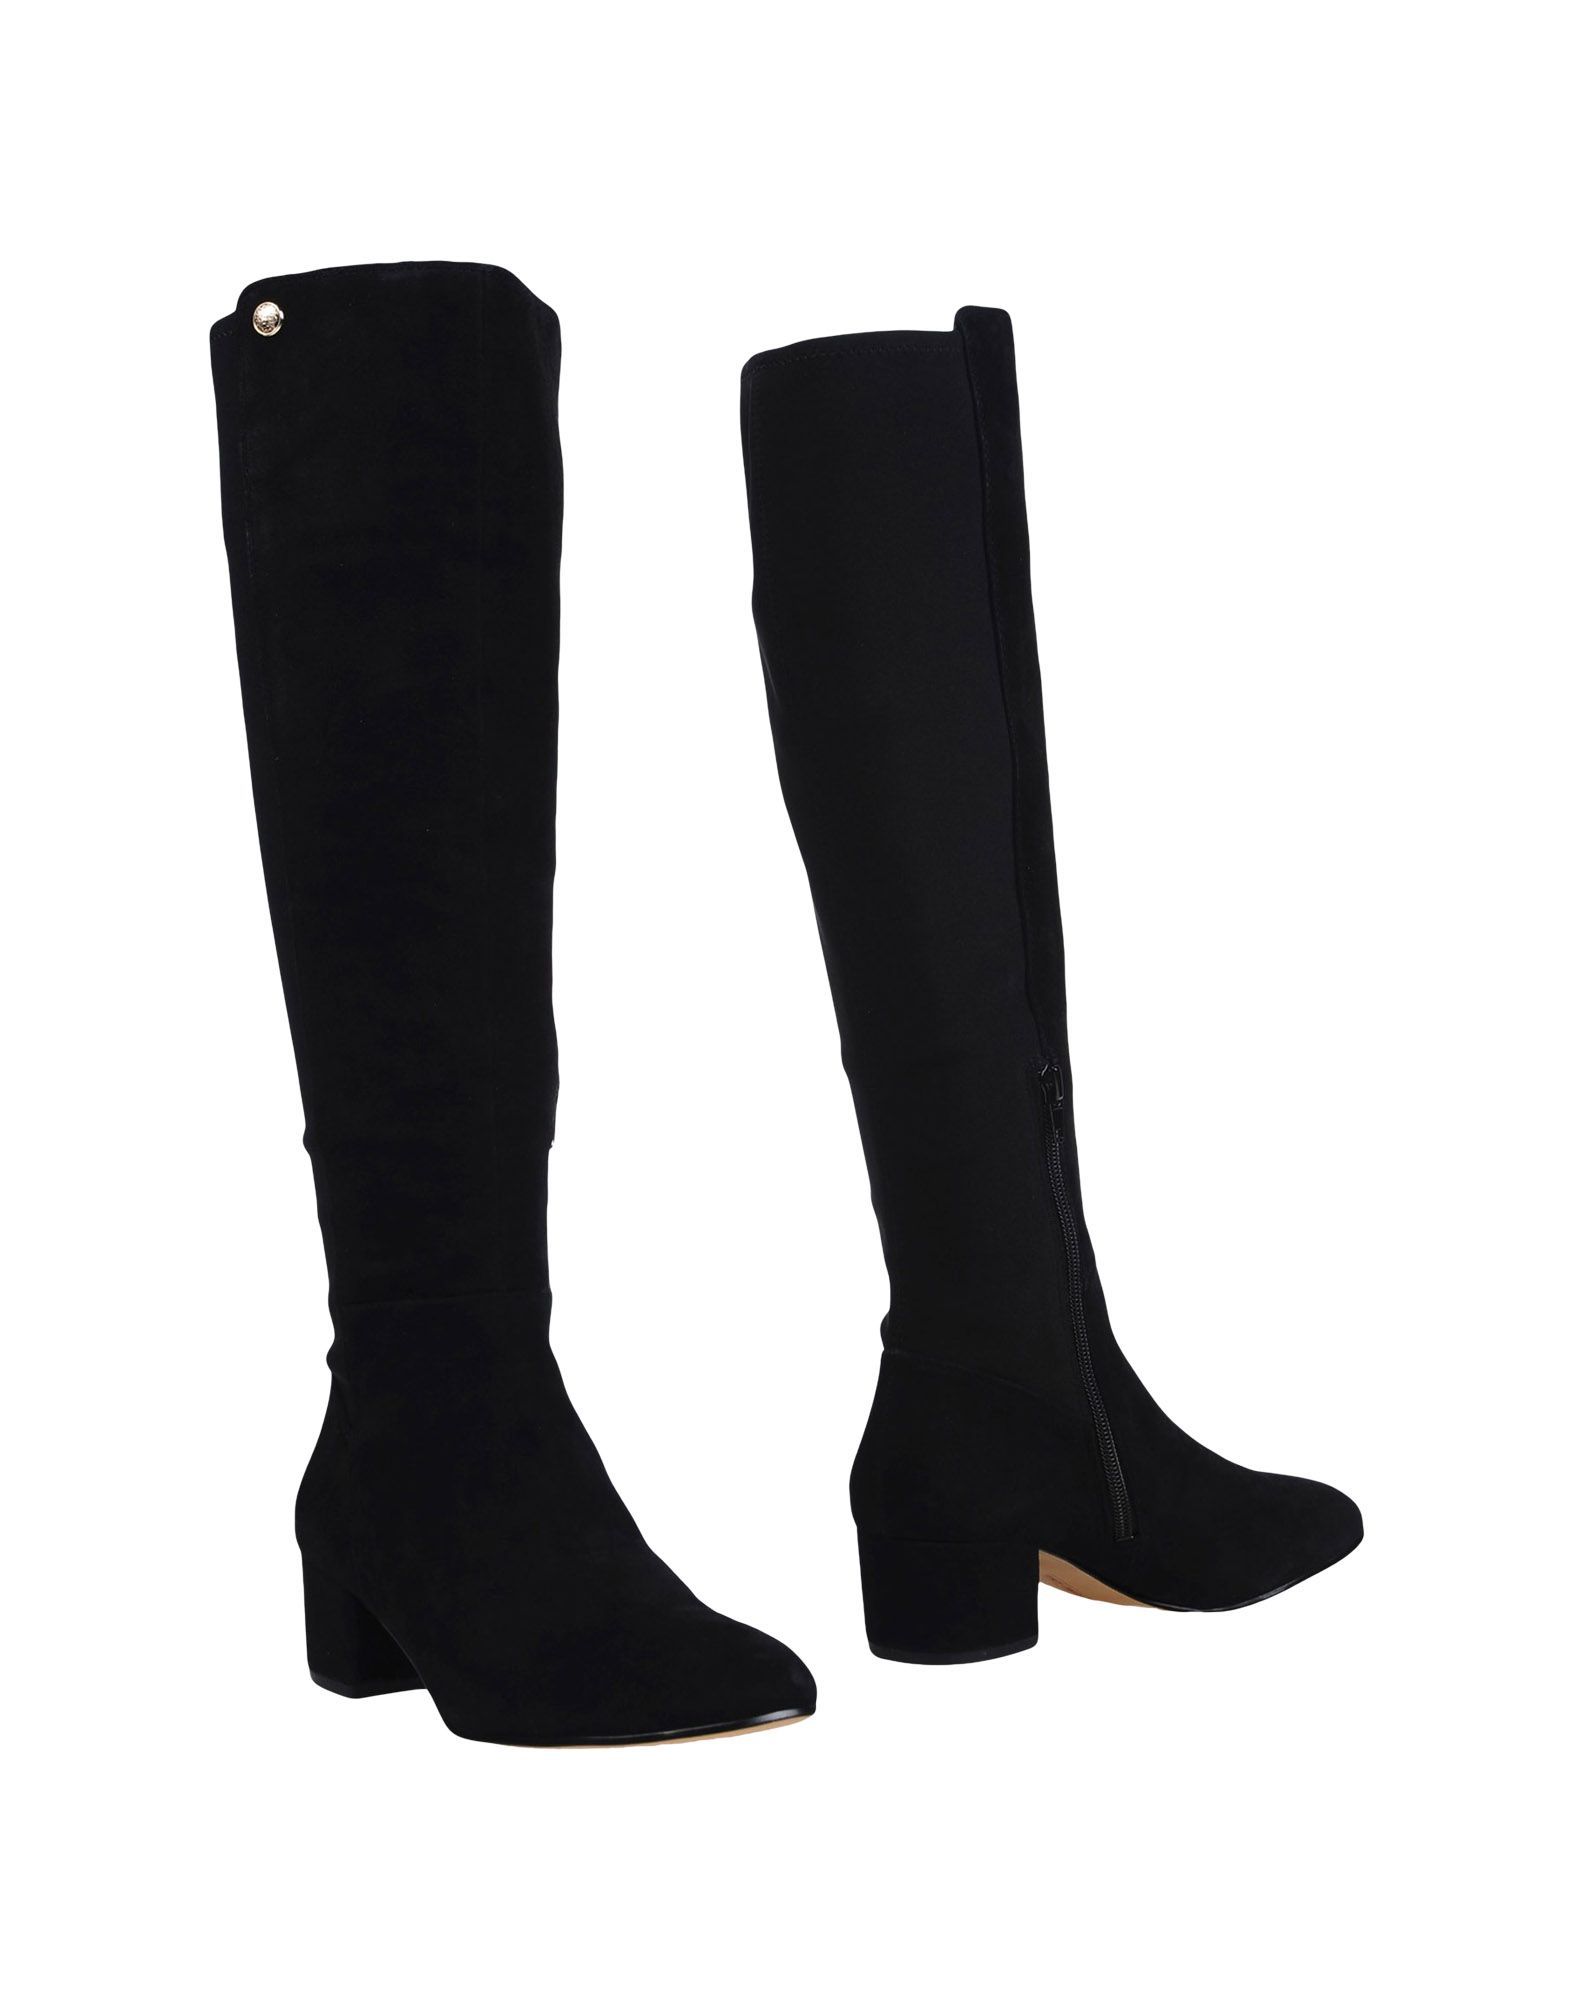 VINCE CAMUTO Boots | YOOX (US)